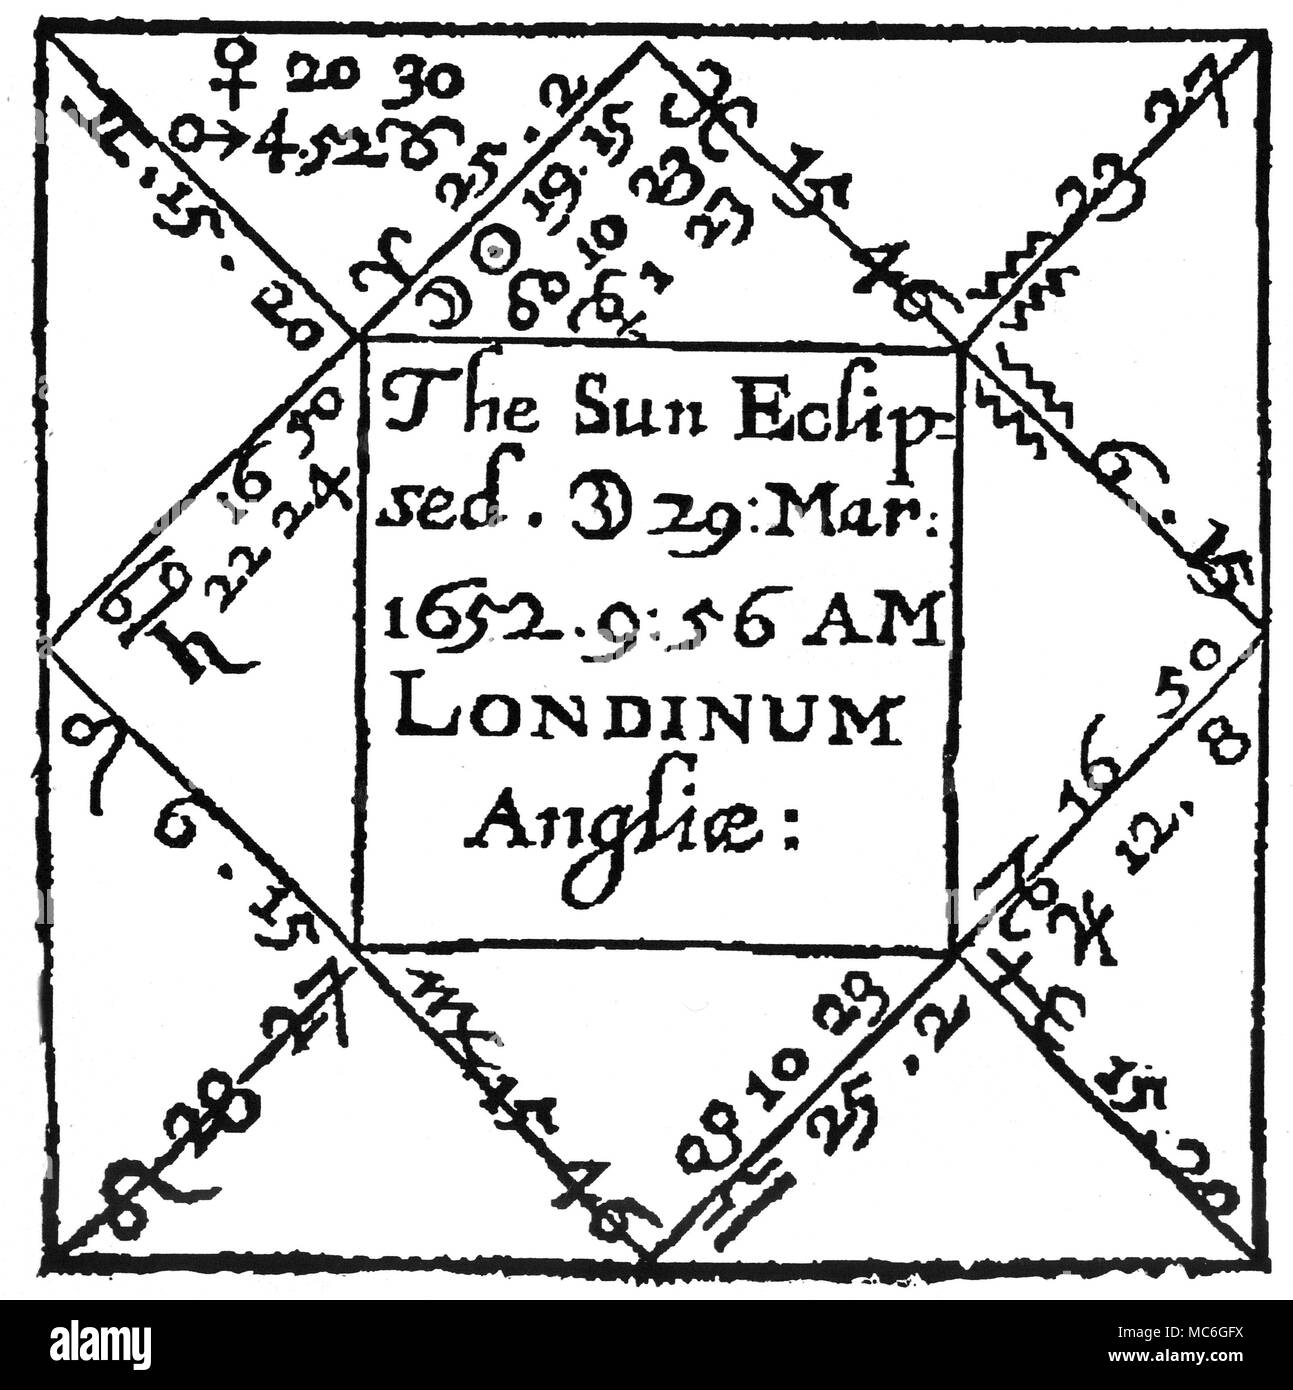 ASTROLOGY - HOROSCOPES - ECLIPSES 'The Famous Eclips of the Sun, 1652. Munday, 29th March, 9.56. A.M.' Horoscope cast for the moment of the eclipse, from William Lilly's Annus Tenebrosus, or the Dark Year, Or Astrologicall Judgments upon two Lunar Eclipses, and one admirable eclips of the Sun, all visible in England, 1652. Stock Photo